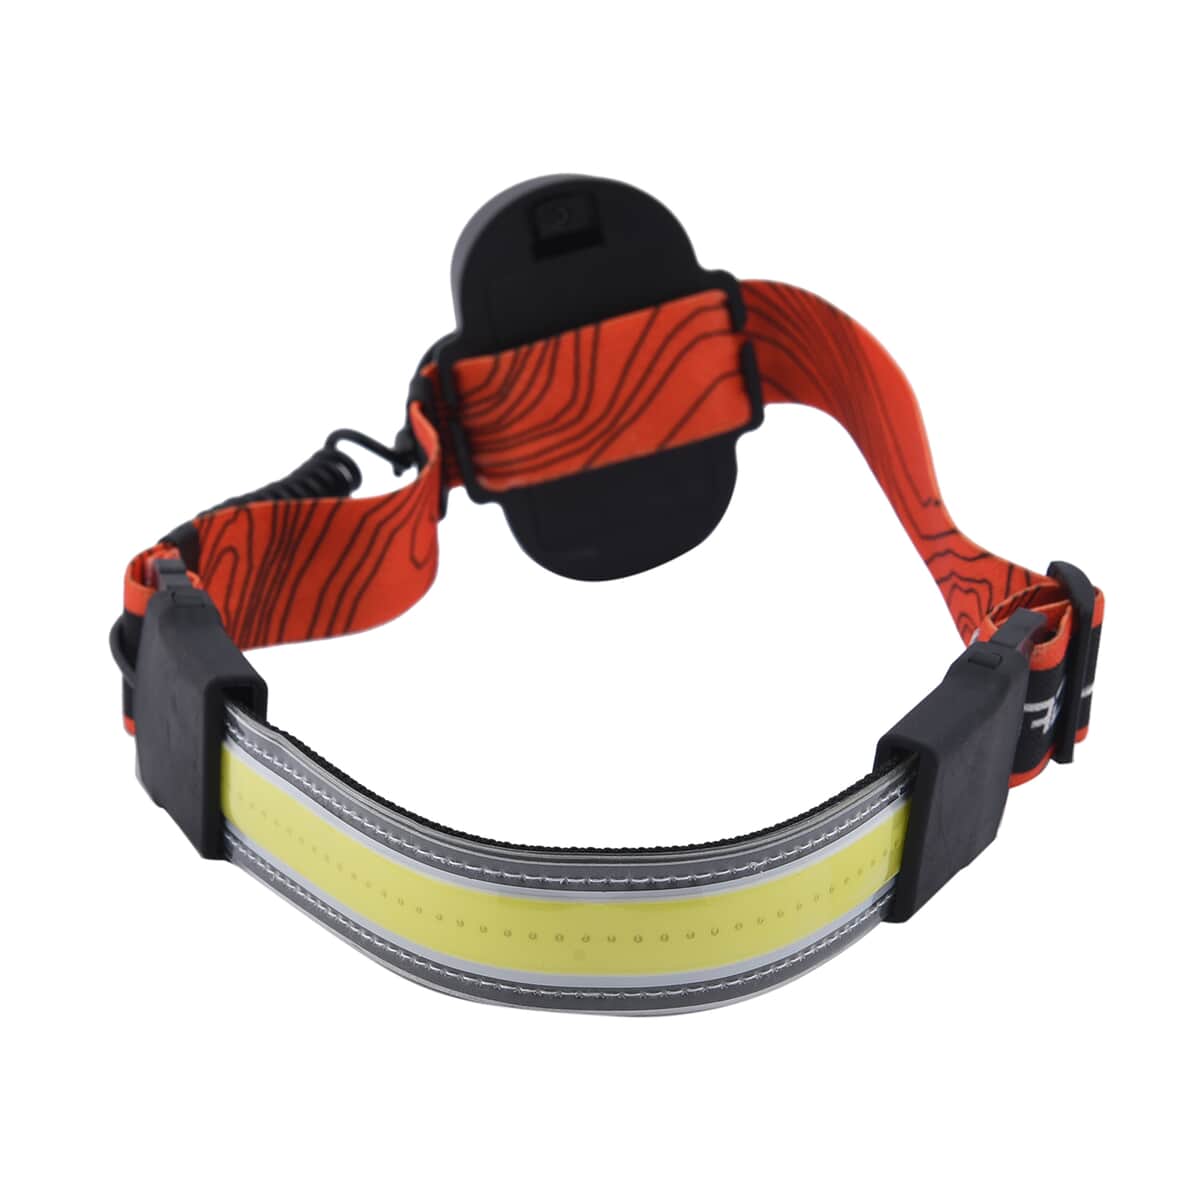 Black and Orange Ultra-Thin Led Headlight with 3 Levels of Adjustment 3 AAA Battery (not included) image number 3